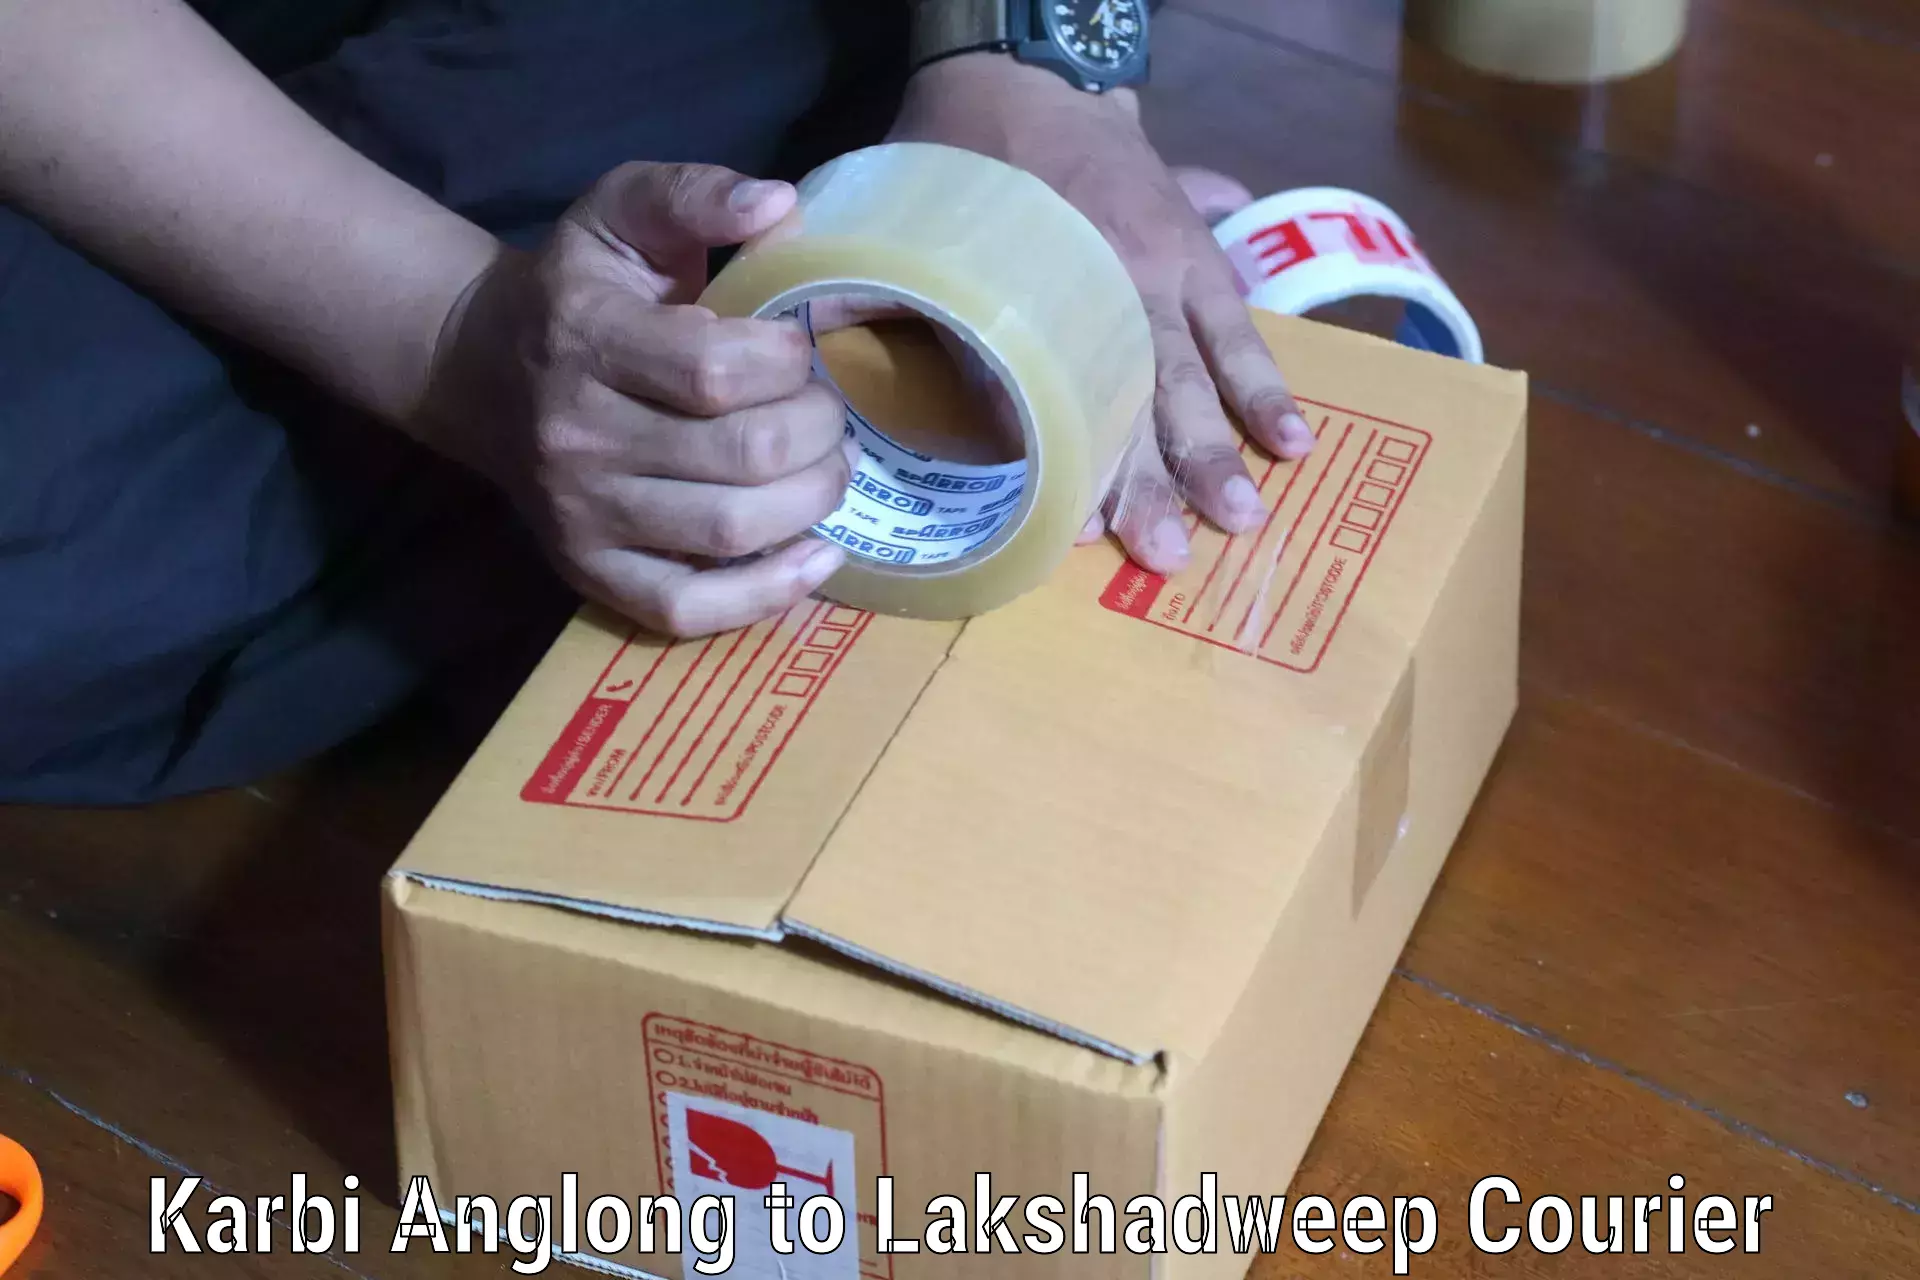 Overnight delivery services Karbi Anglong to Lakshadweep